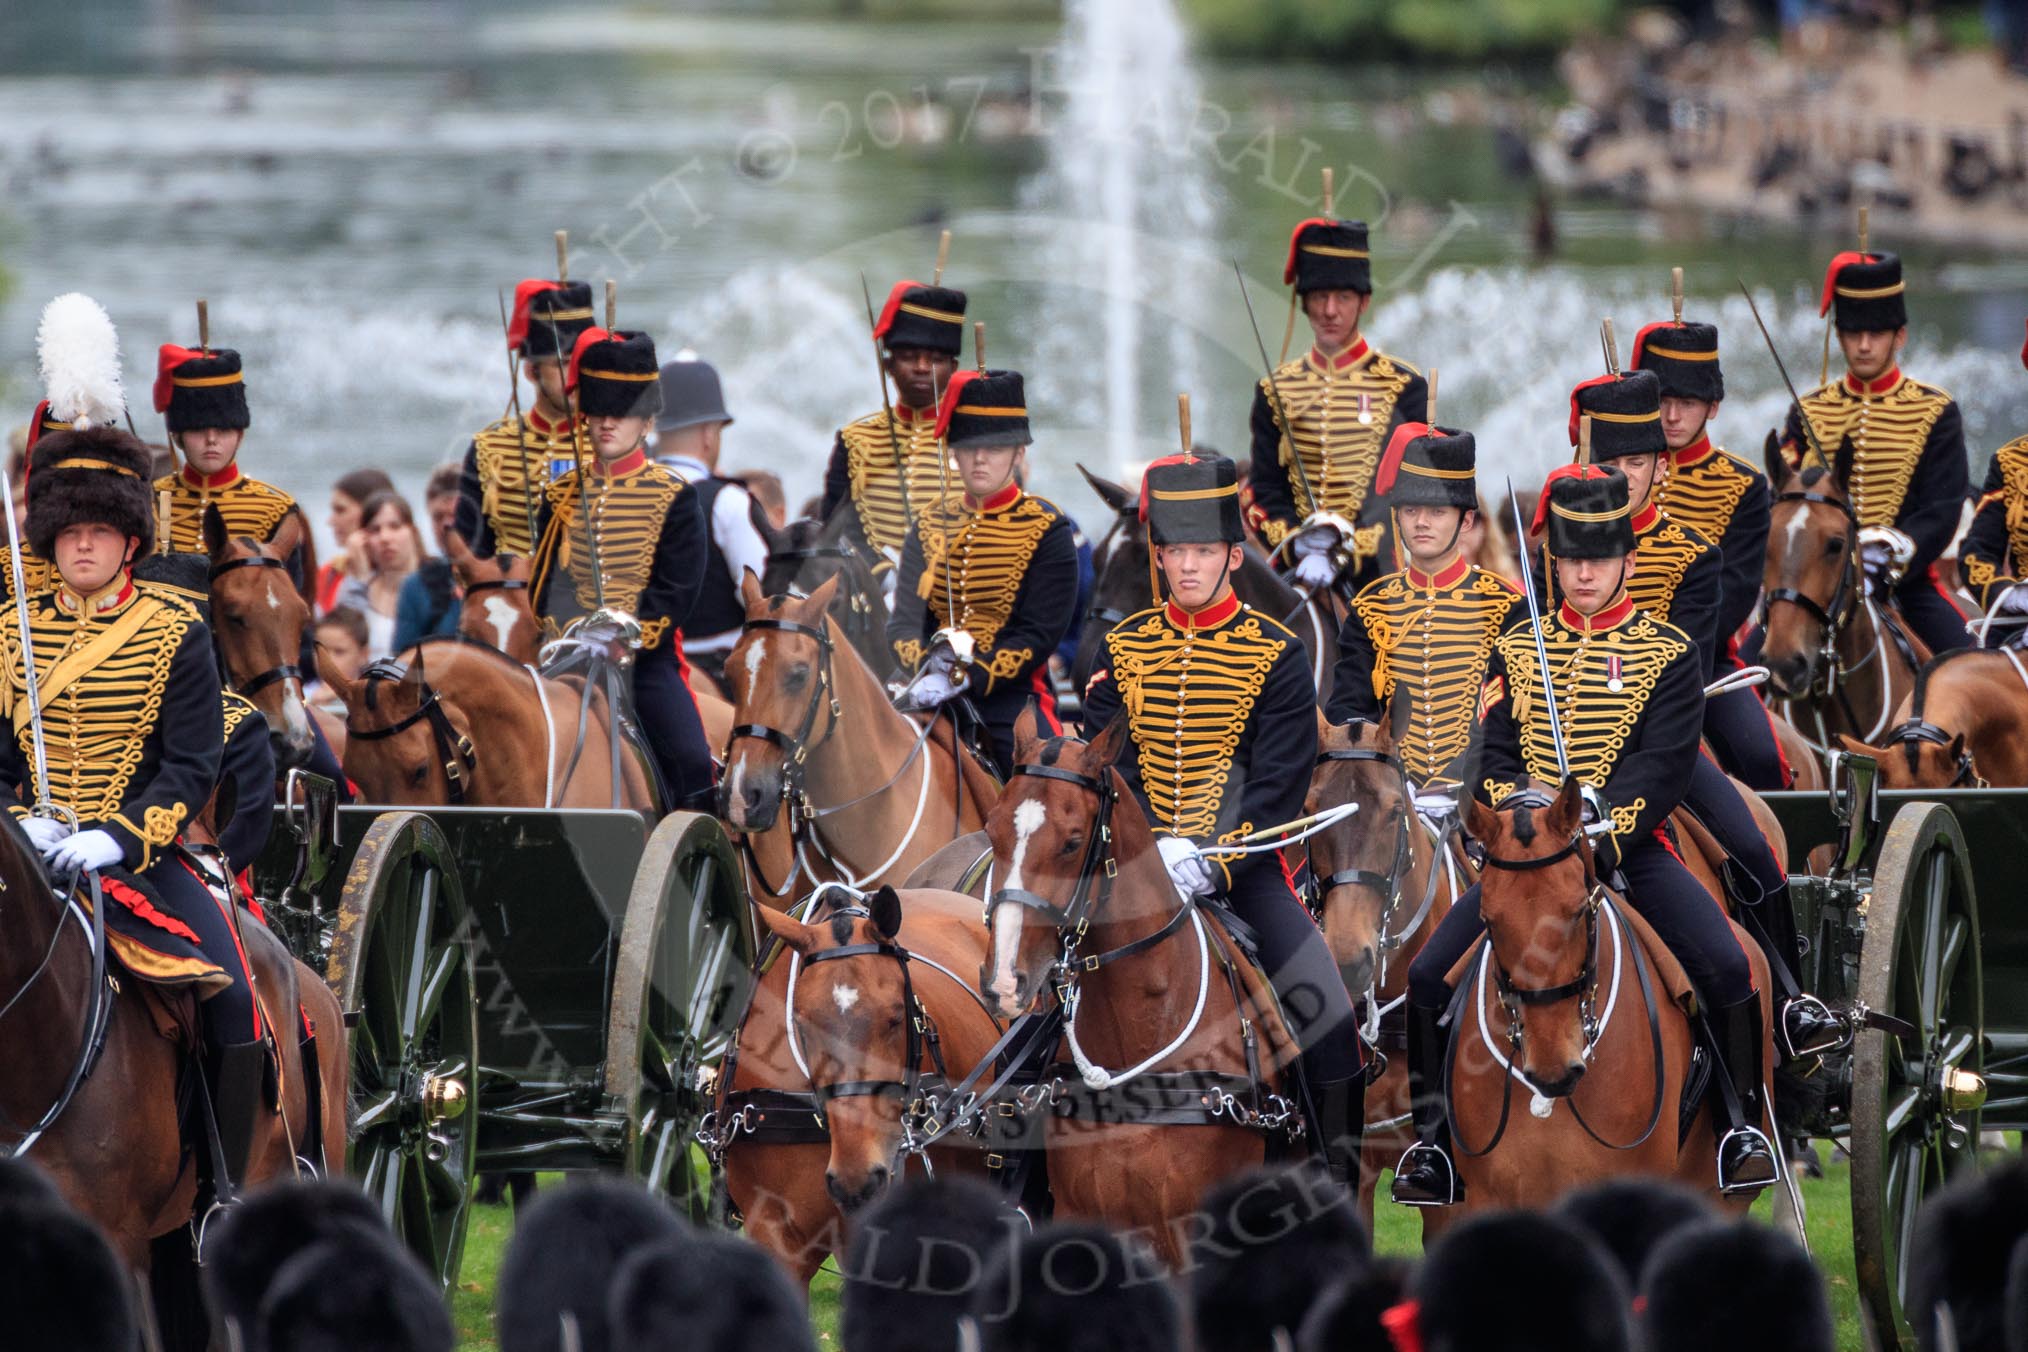 during The Colonel's Review {iptcyear4} (final rehearsal for Trooping the Colour, The Queen's Birthday Parade)  at Horse Guards Parade, Westminster, London, 2 June 2018, 10:46.